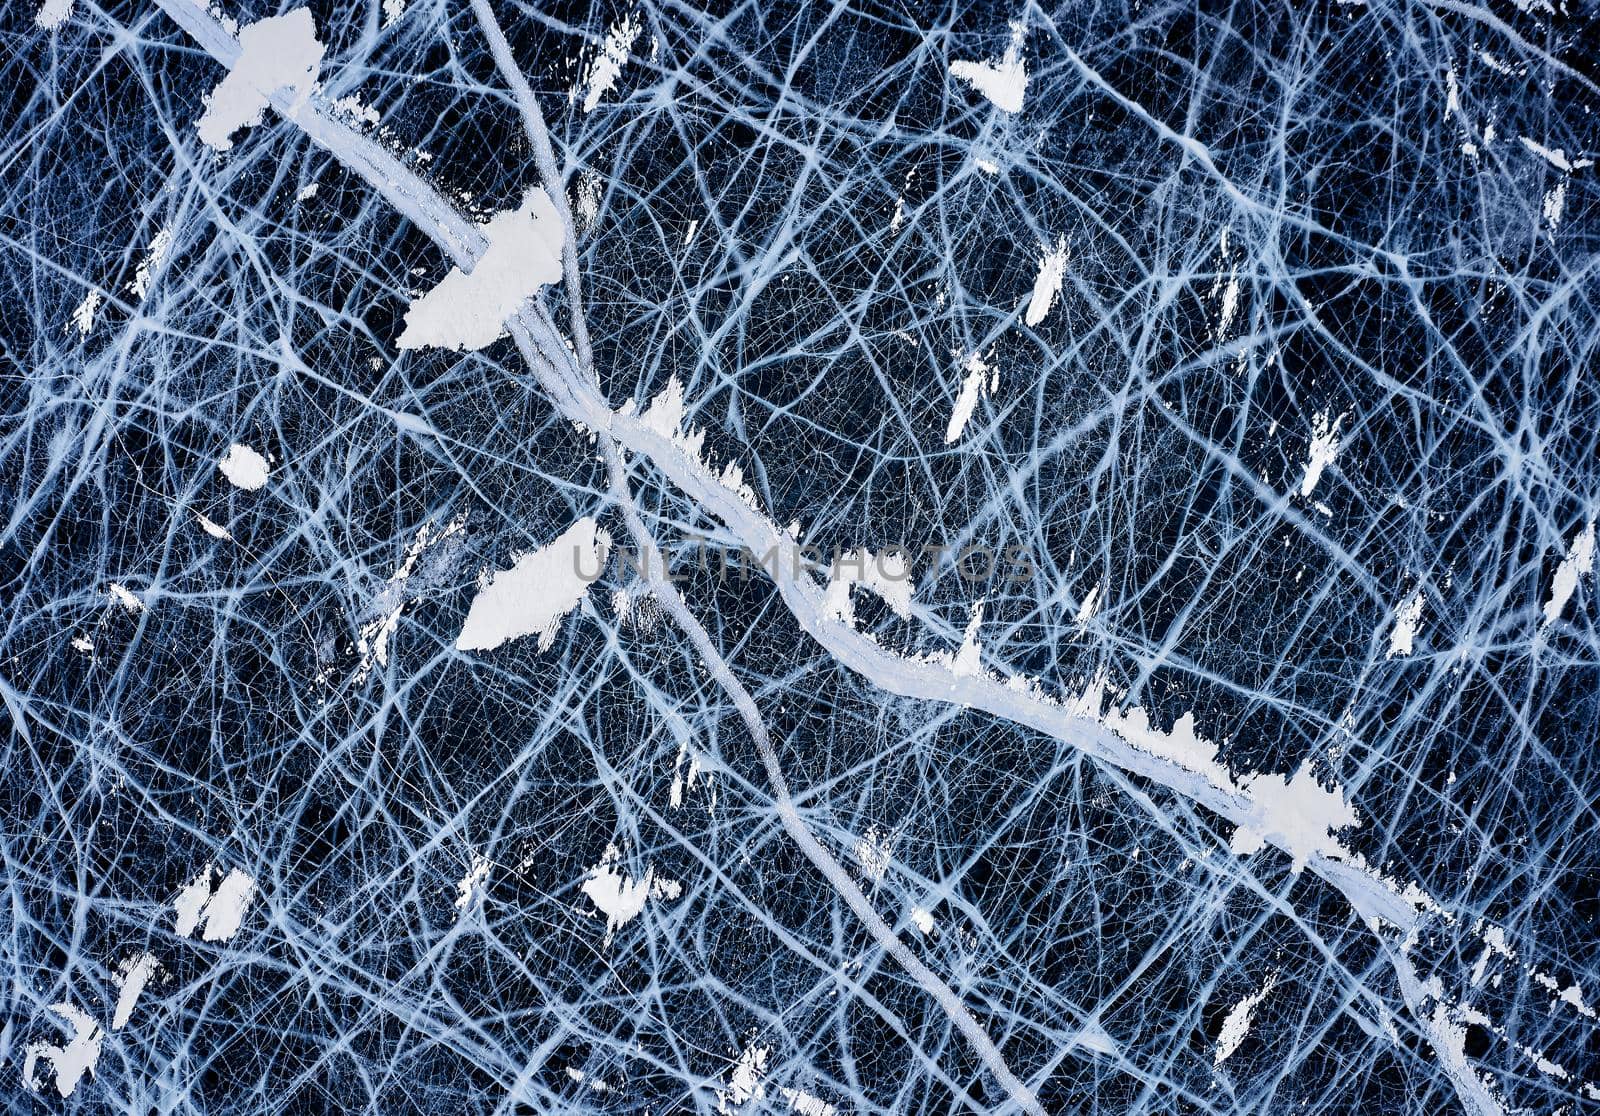 Deep blue ice - aerial view. Aesthetics of ice. frozen lake. Clean water texture of ice. View of beautiful drawings on ice, Baikal lake in winter